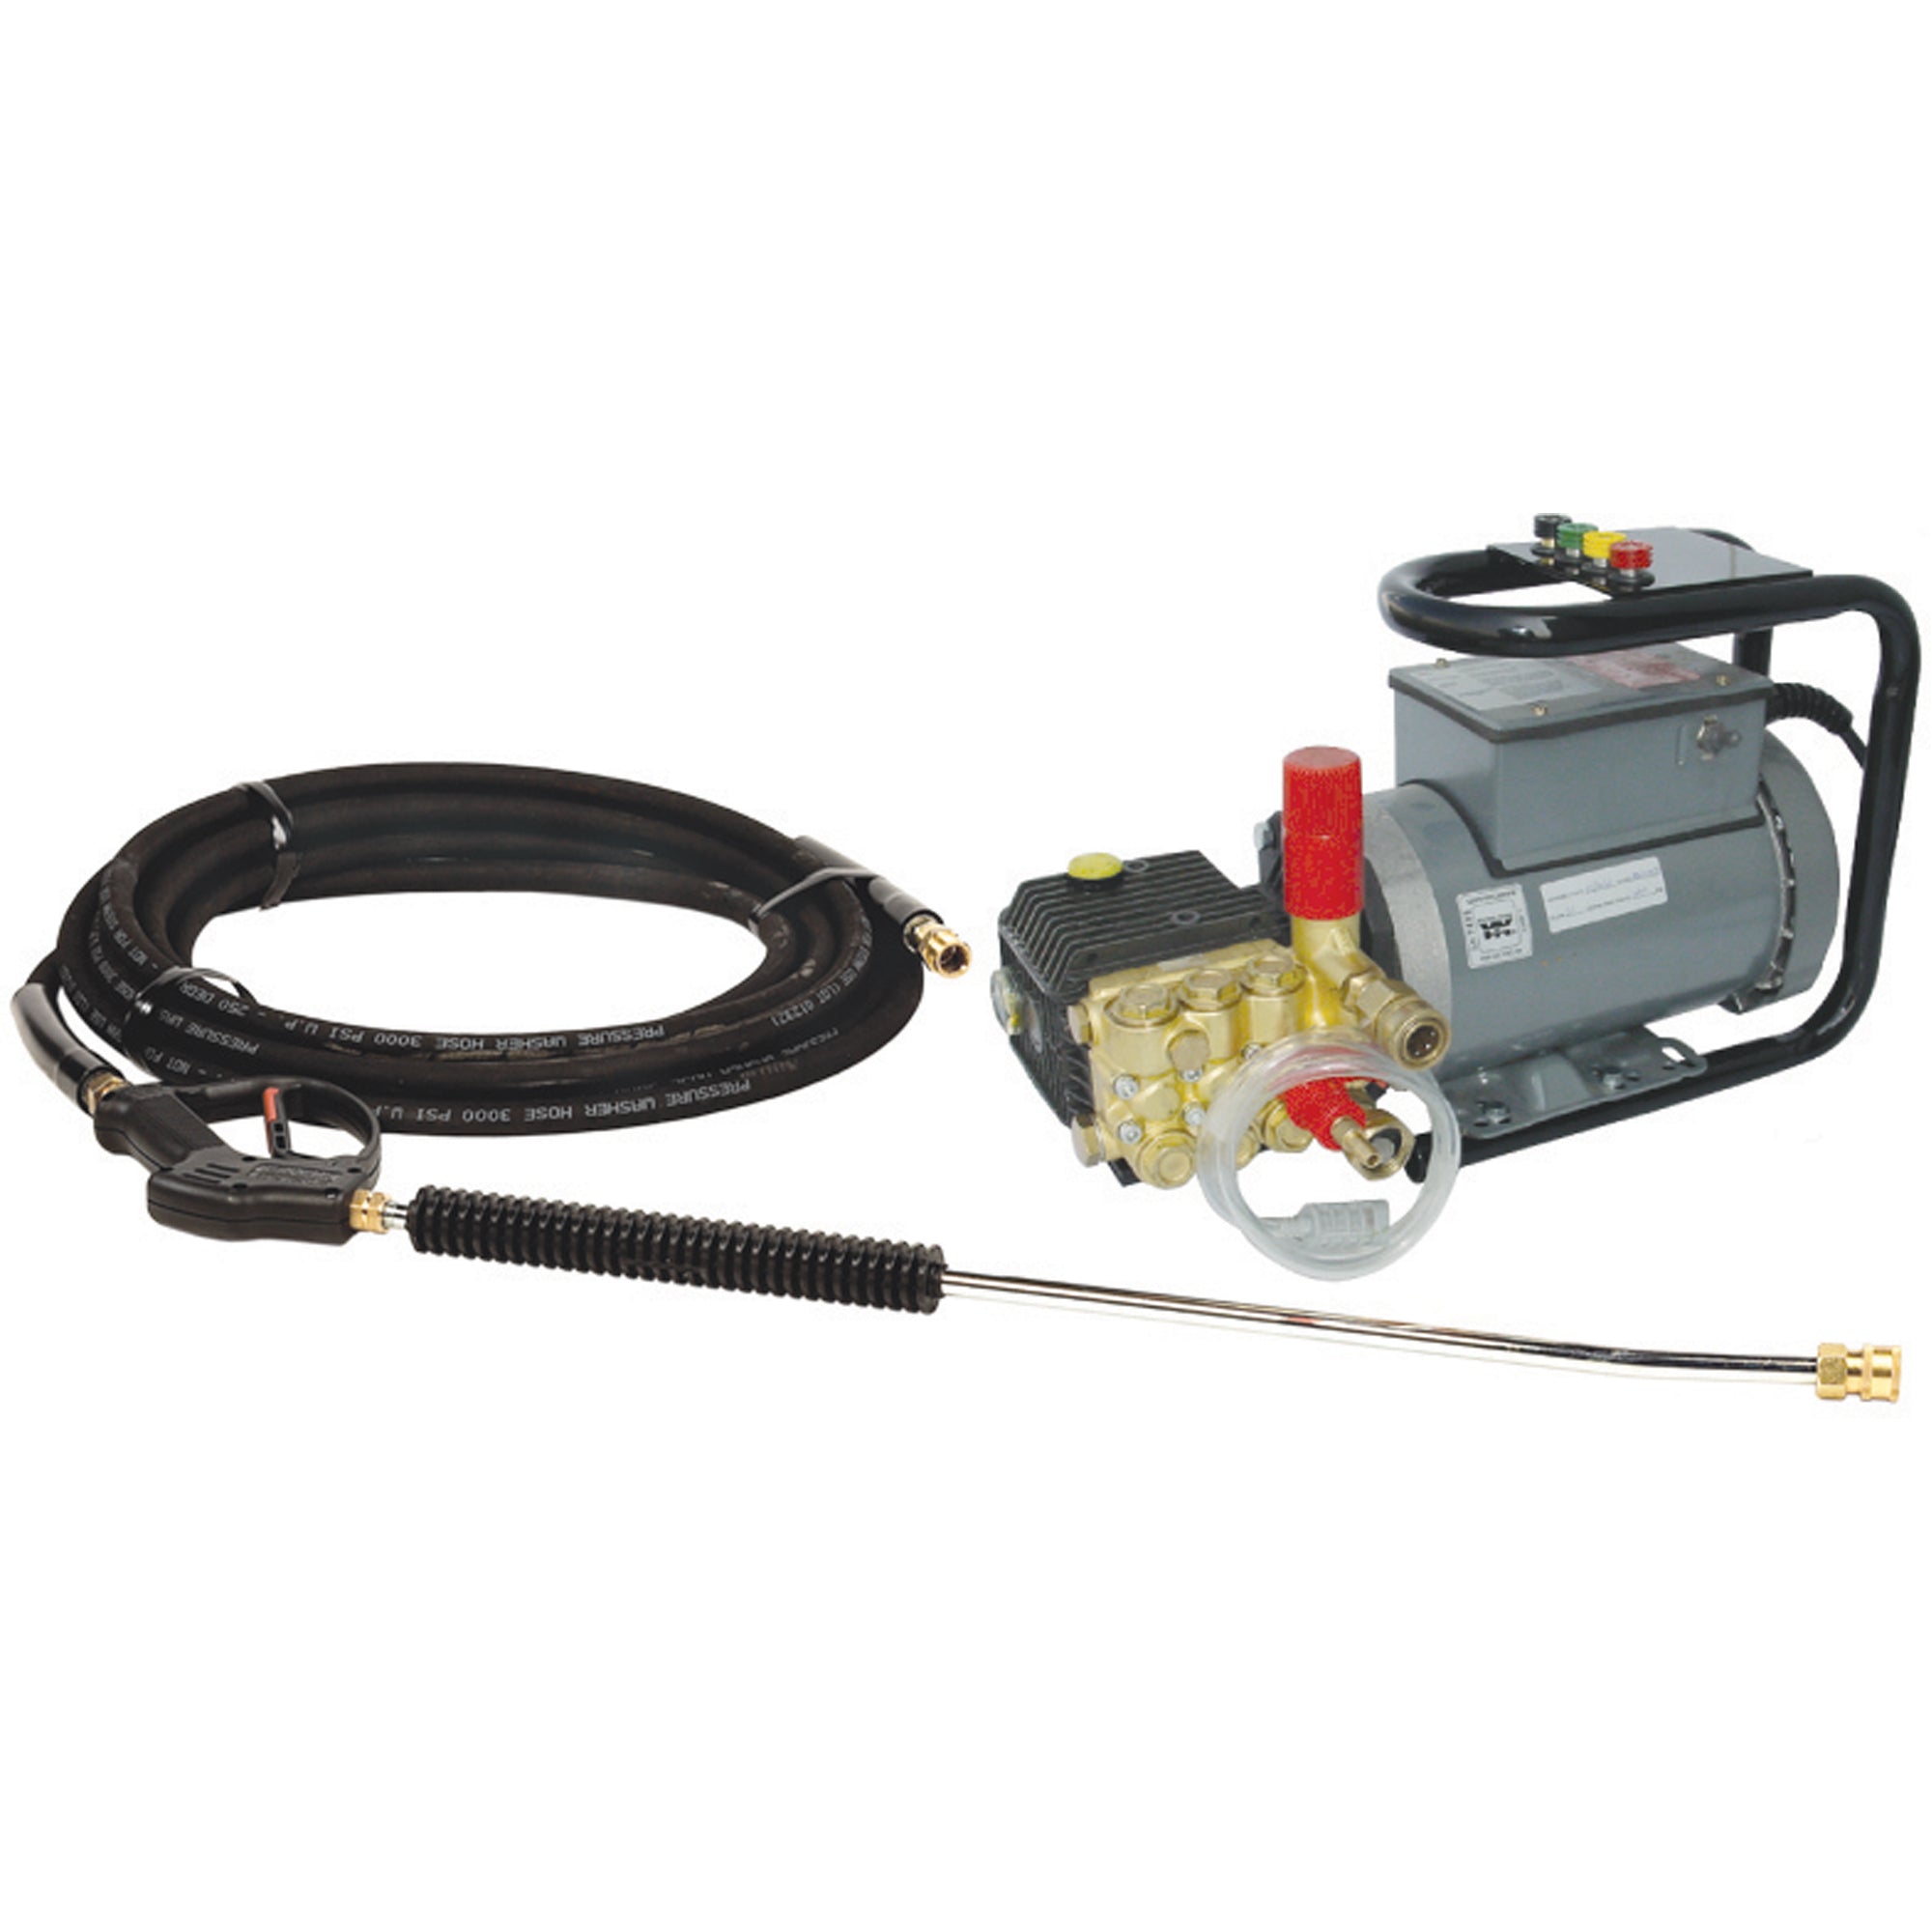 Cold Water Commercial Grade Electric Pressure Washer with Carry Handle - 1000 PSI @ 2.1 GPM